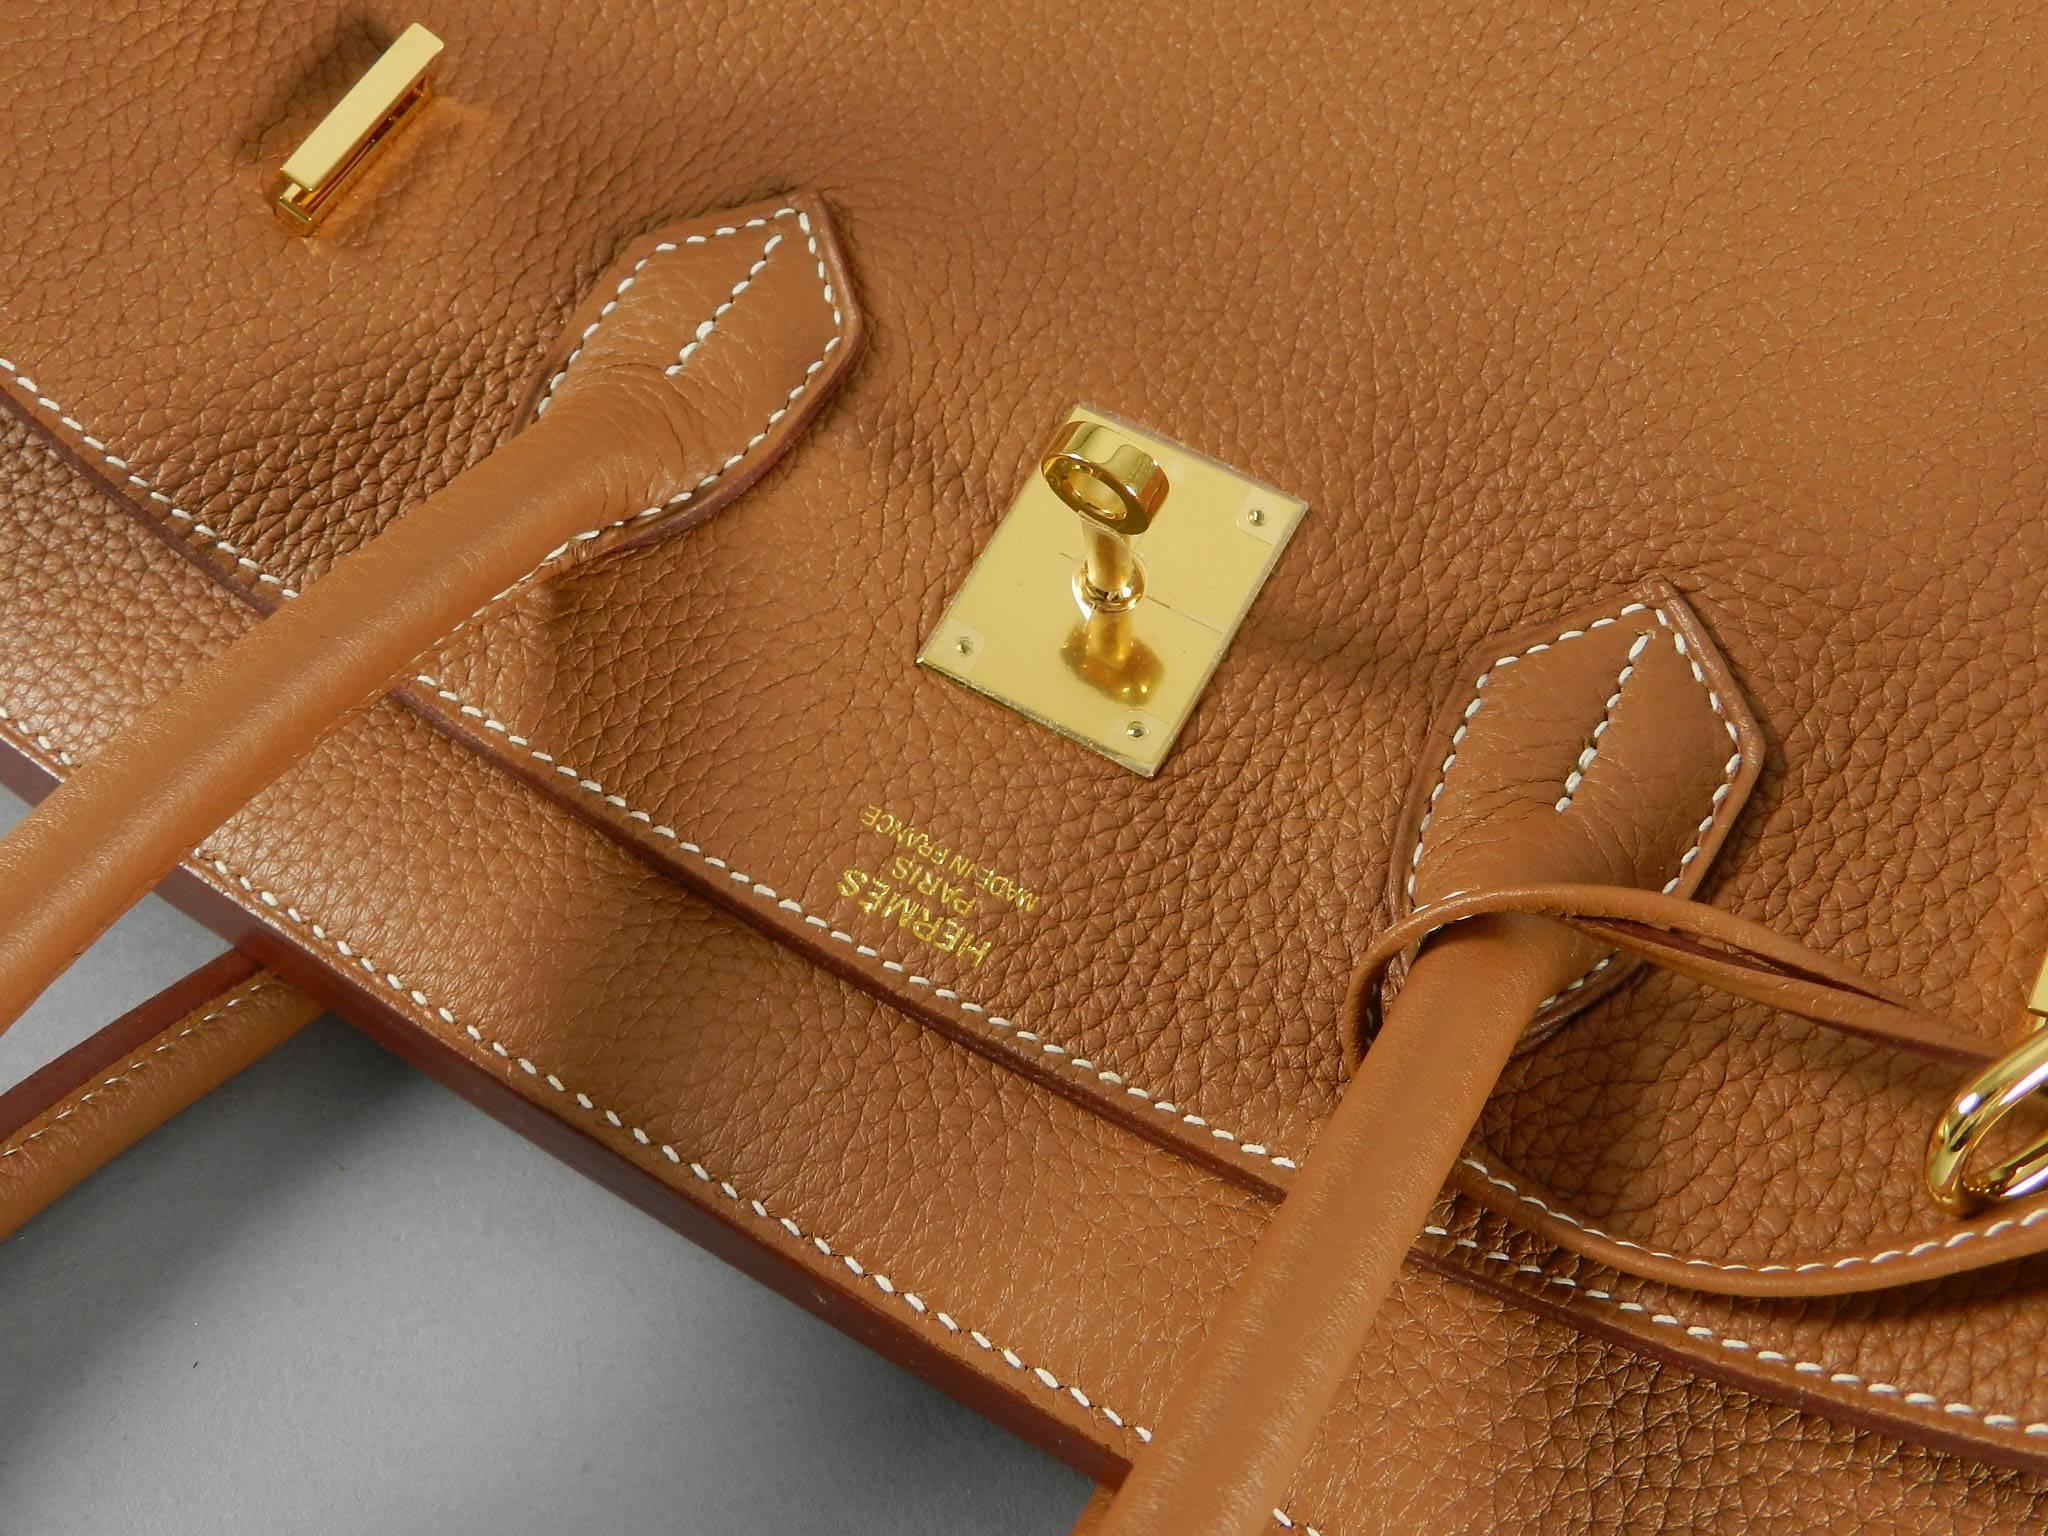 Hermes Birkin 35 Gold in Togo Leather with Gold Hardware 5